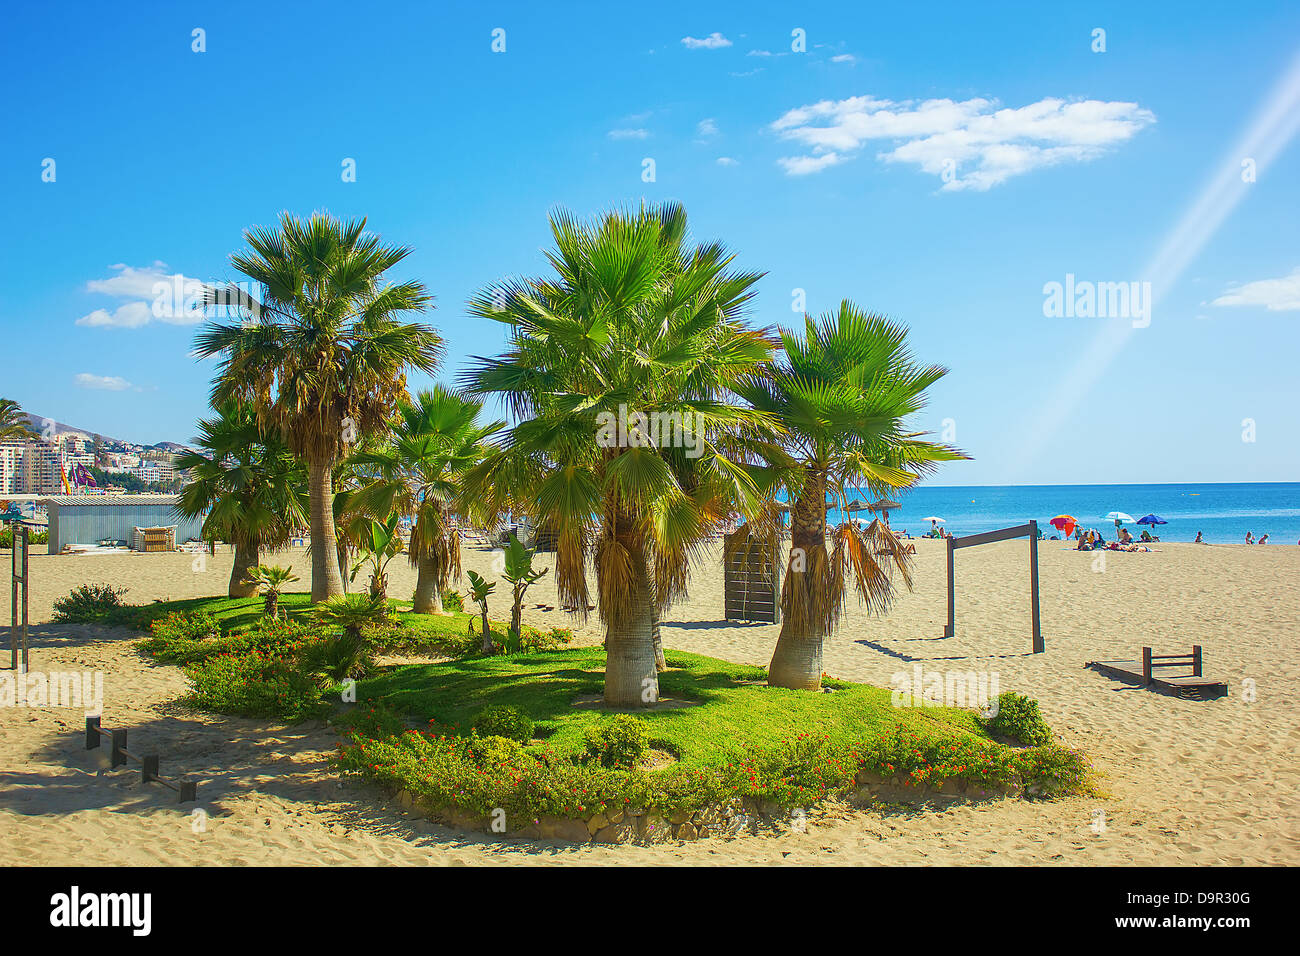 Palm trees on a beach in Fuengirola, Spain Stock Photo